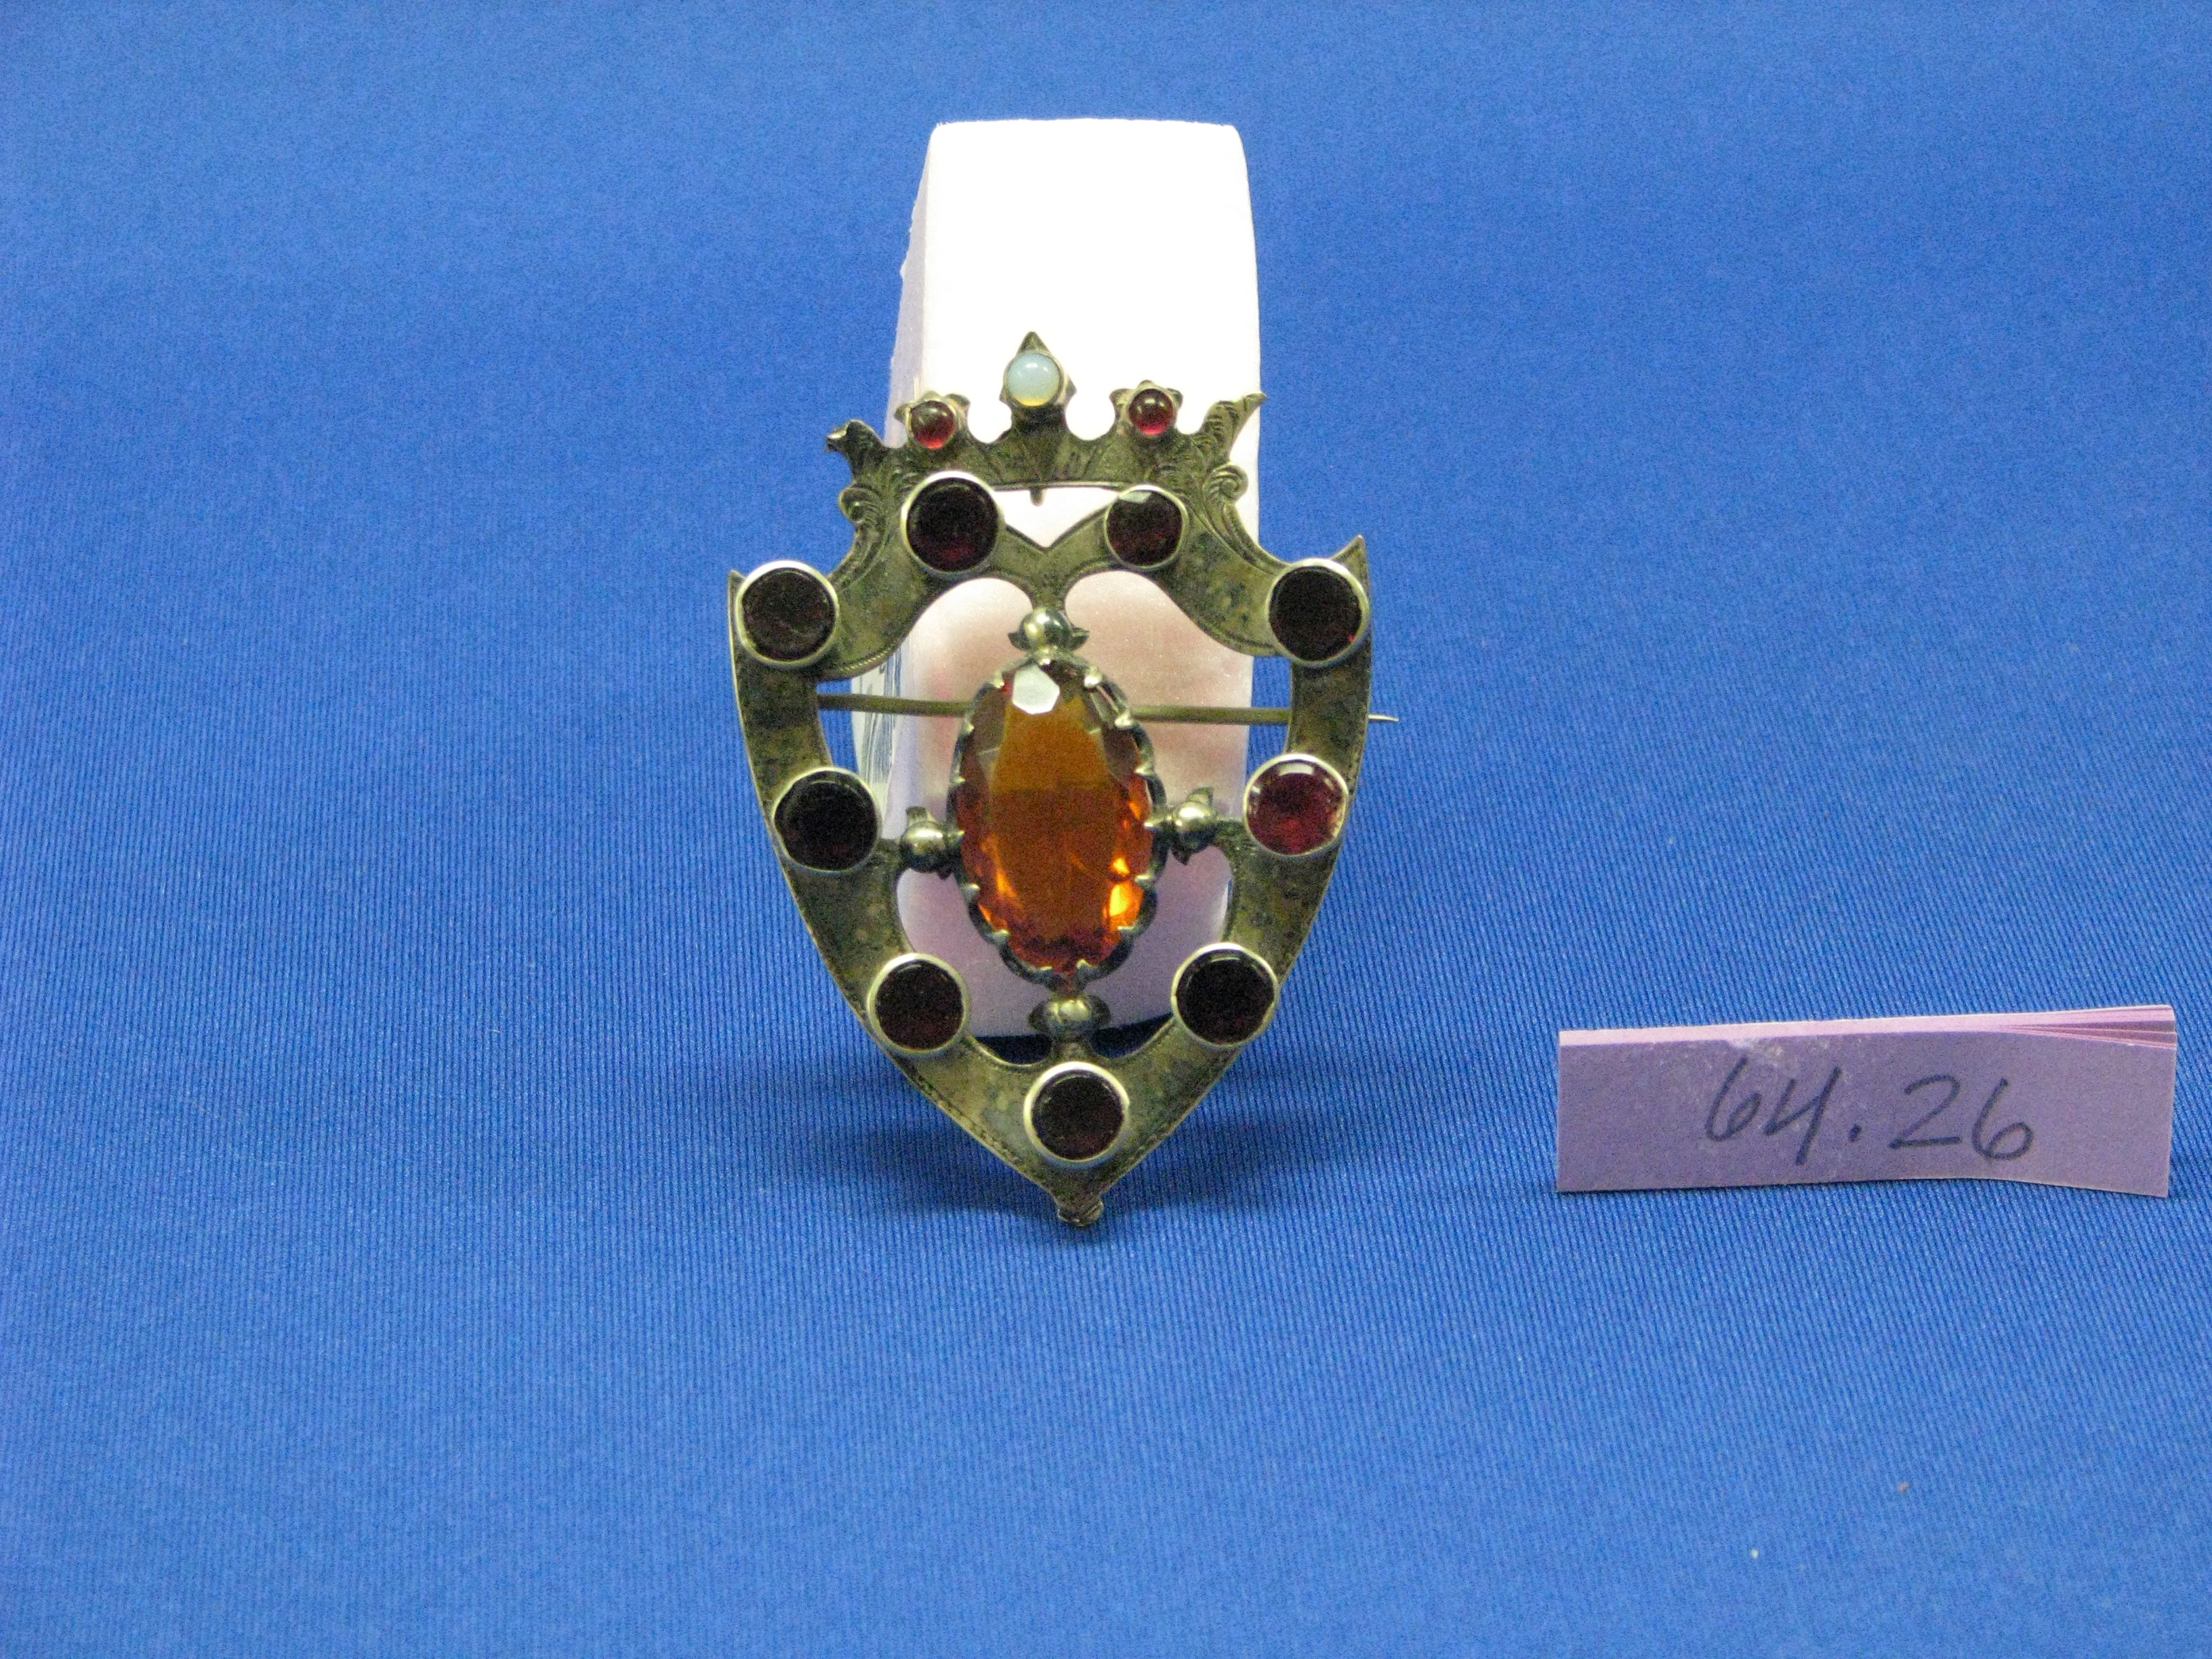 a%209%20gemmed%20Luckenbooth%20brooch%20with%20a%20topaz%20gem%20in%20the%20middle